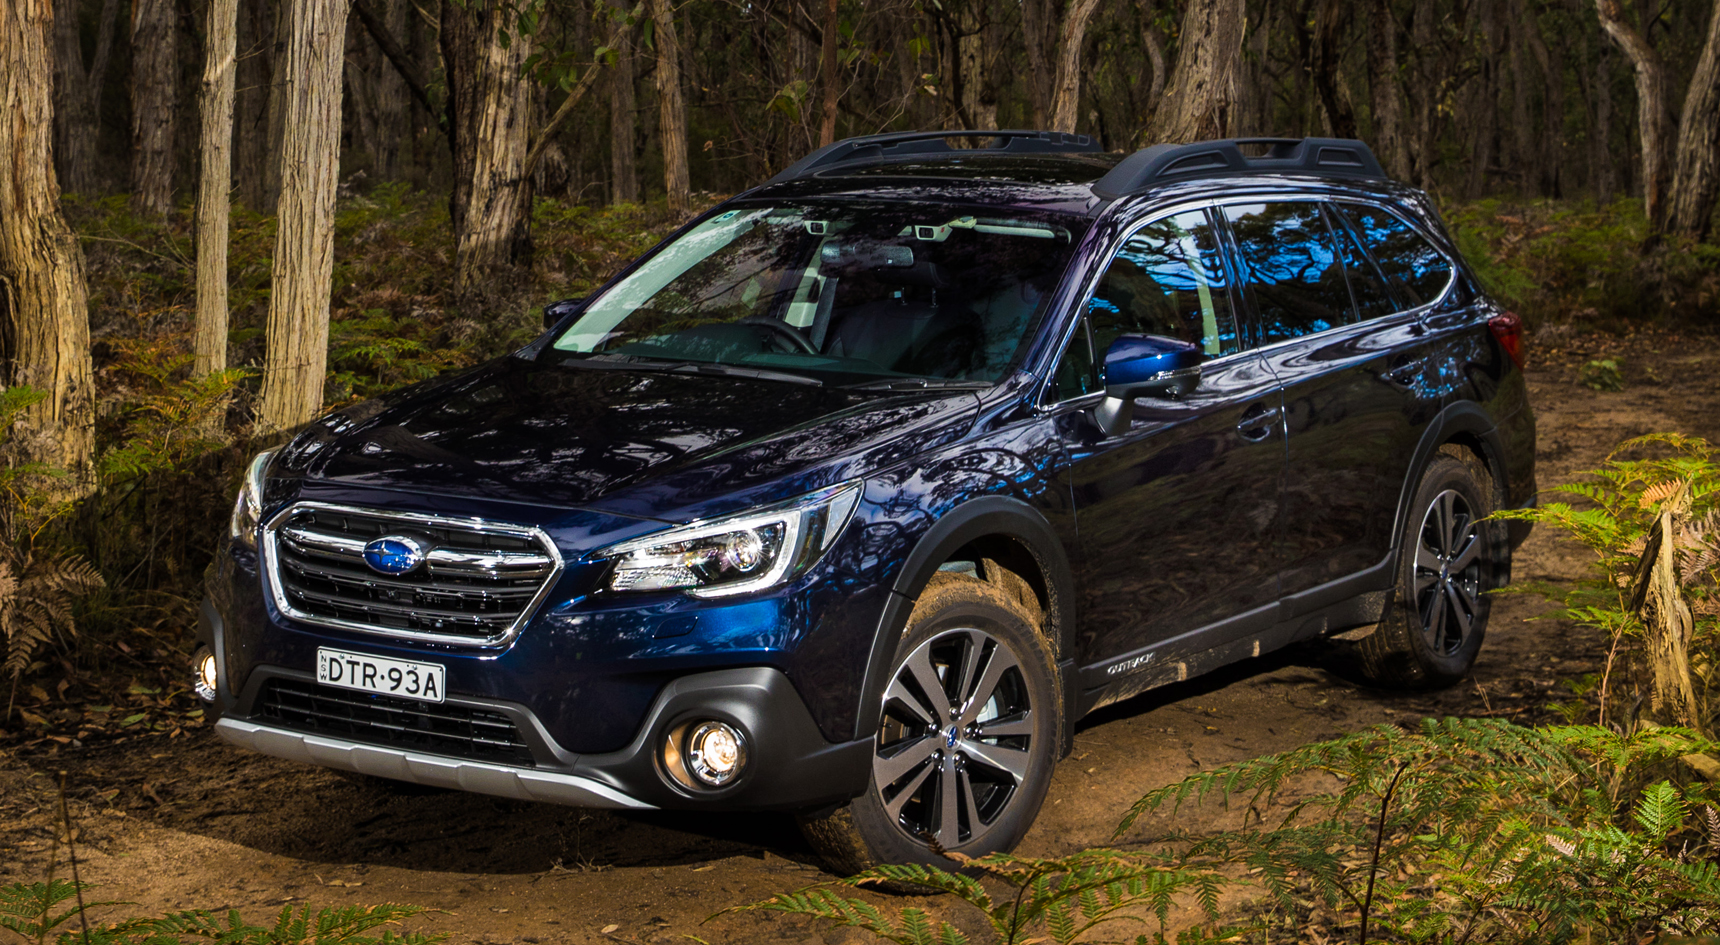 Subaru Outback wins the trophy this year